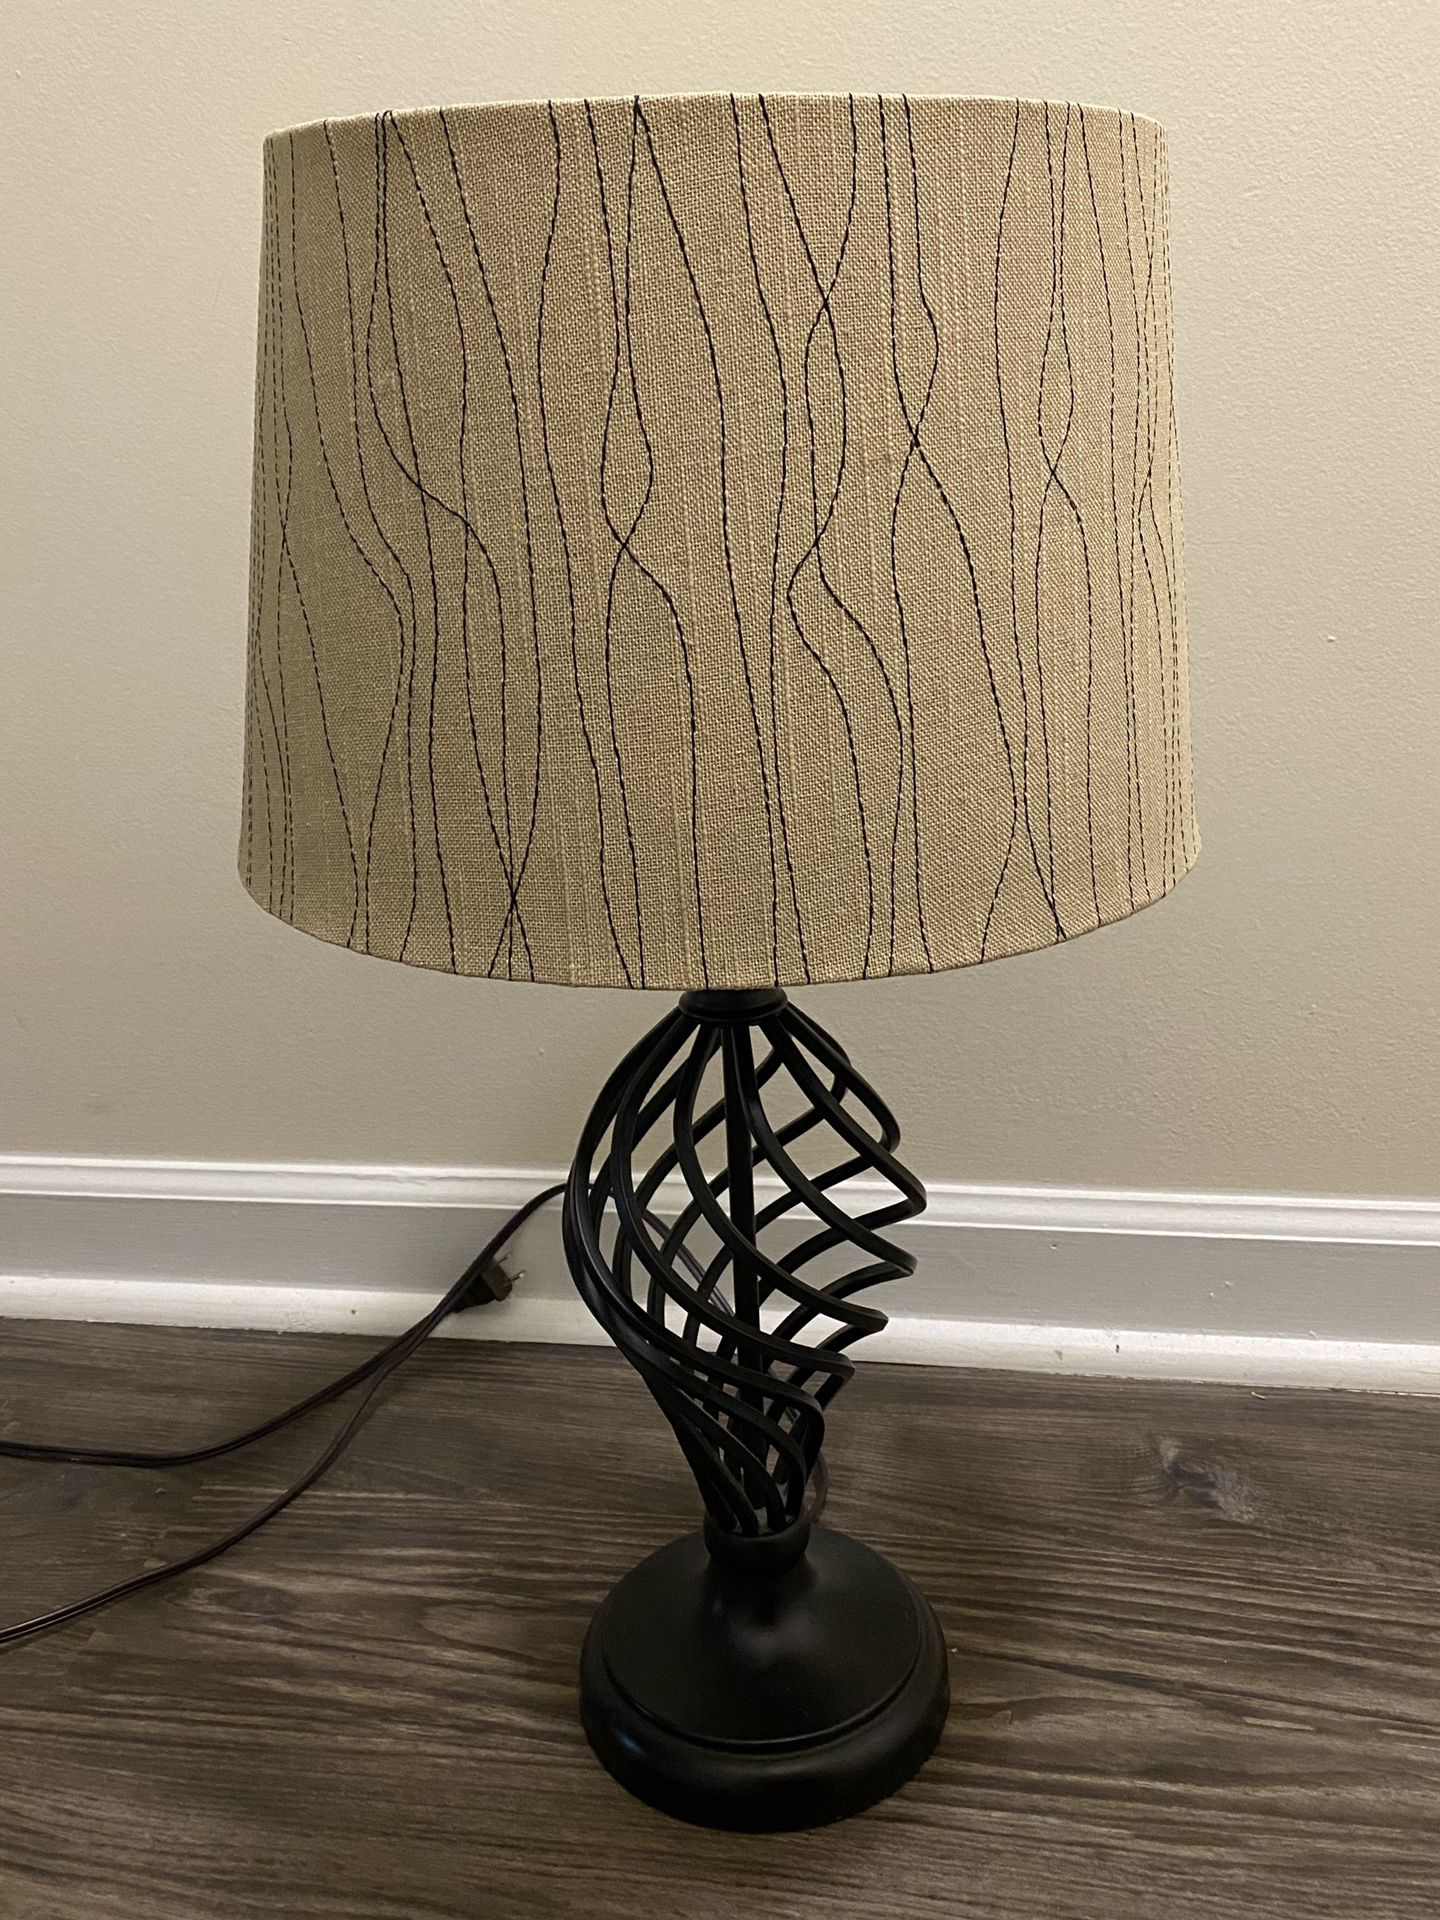 Black Lamp with Tan Embellished Shade